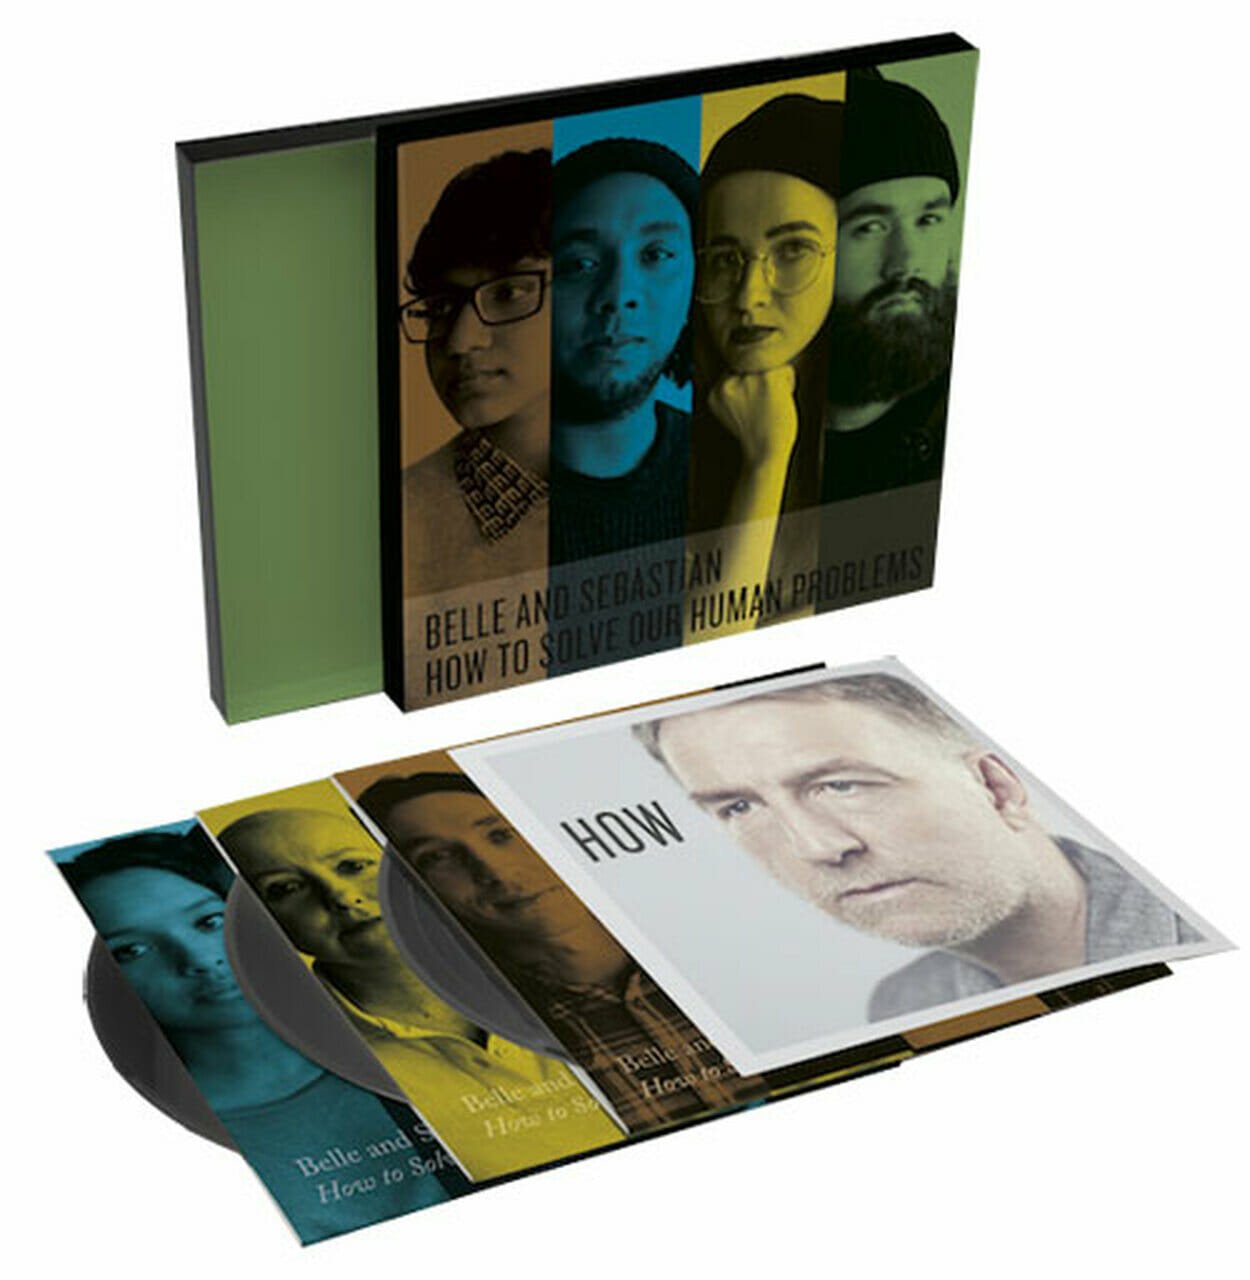 Belle And Sebastian - "How To Solve Our Human Problems" Box Set